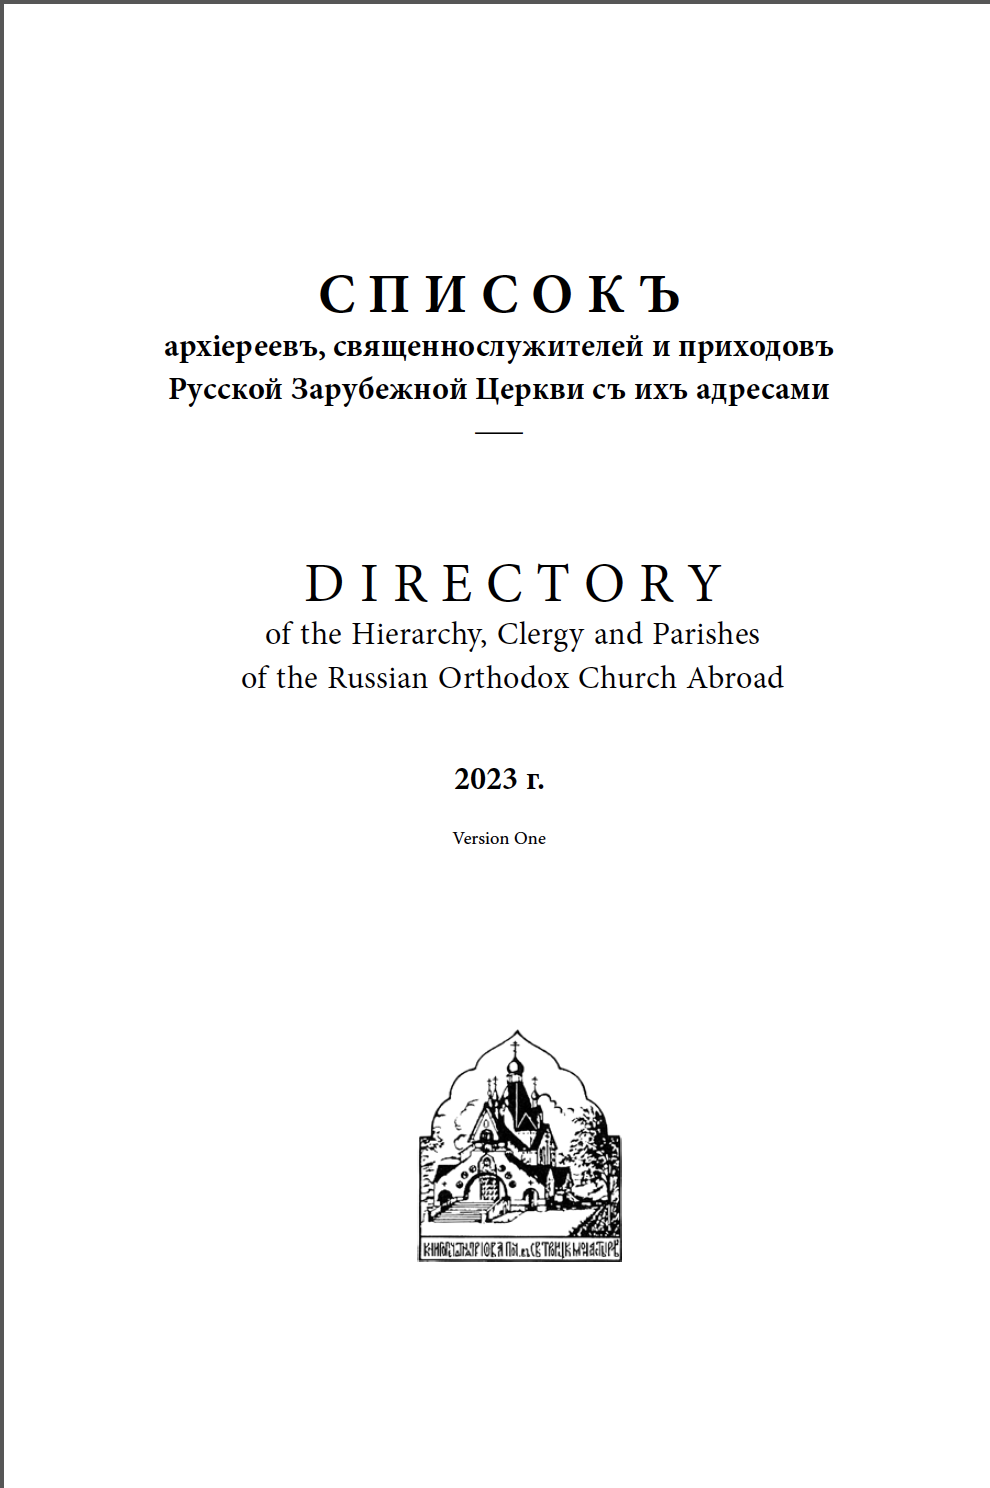 2023 ROCOR Directory now available